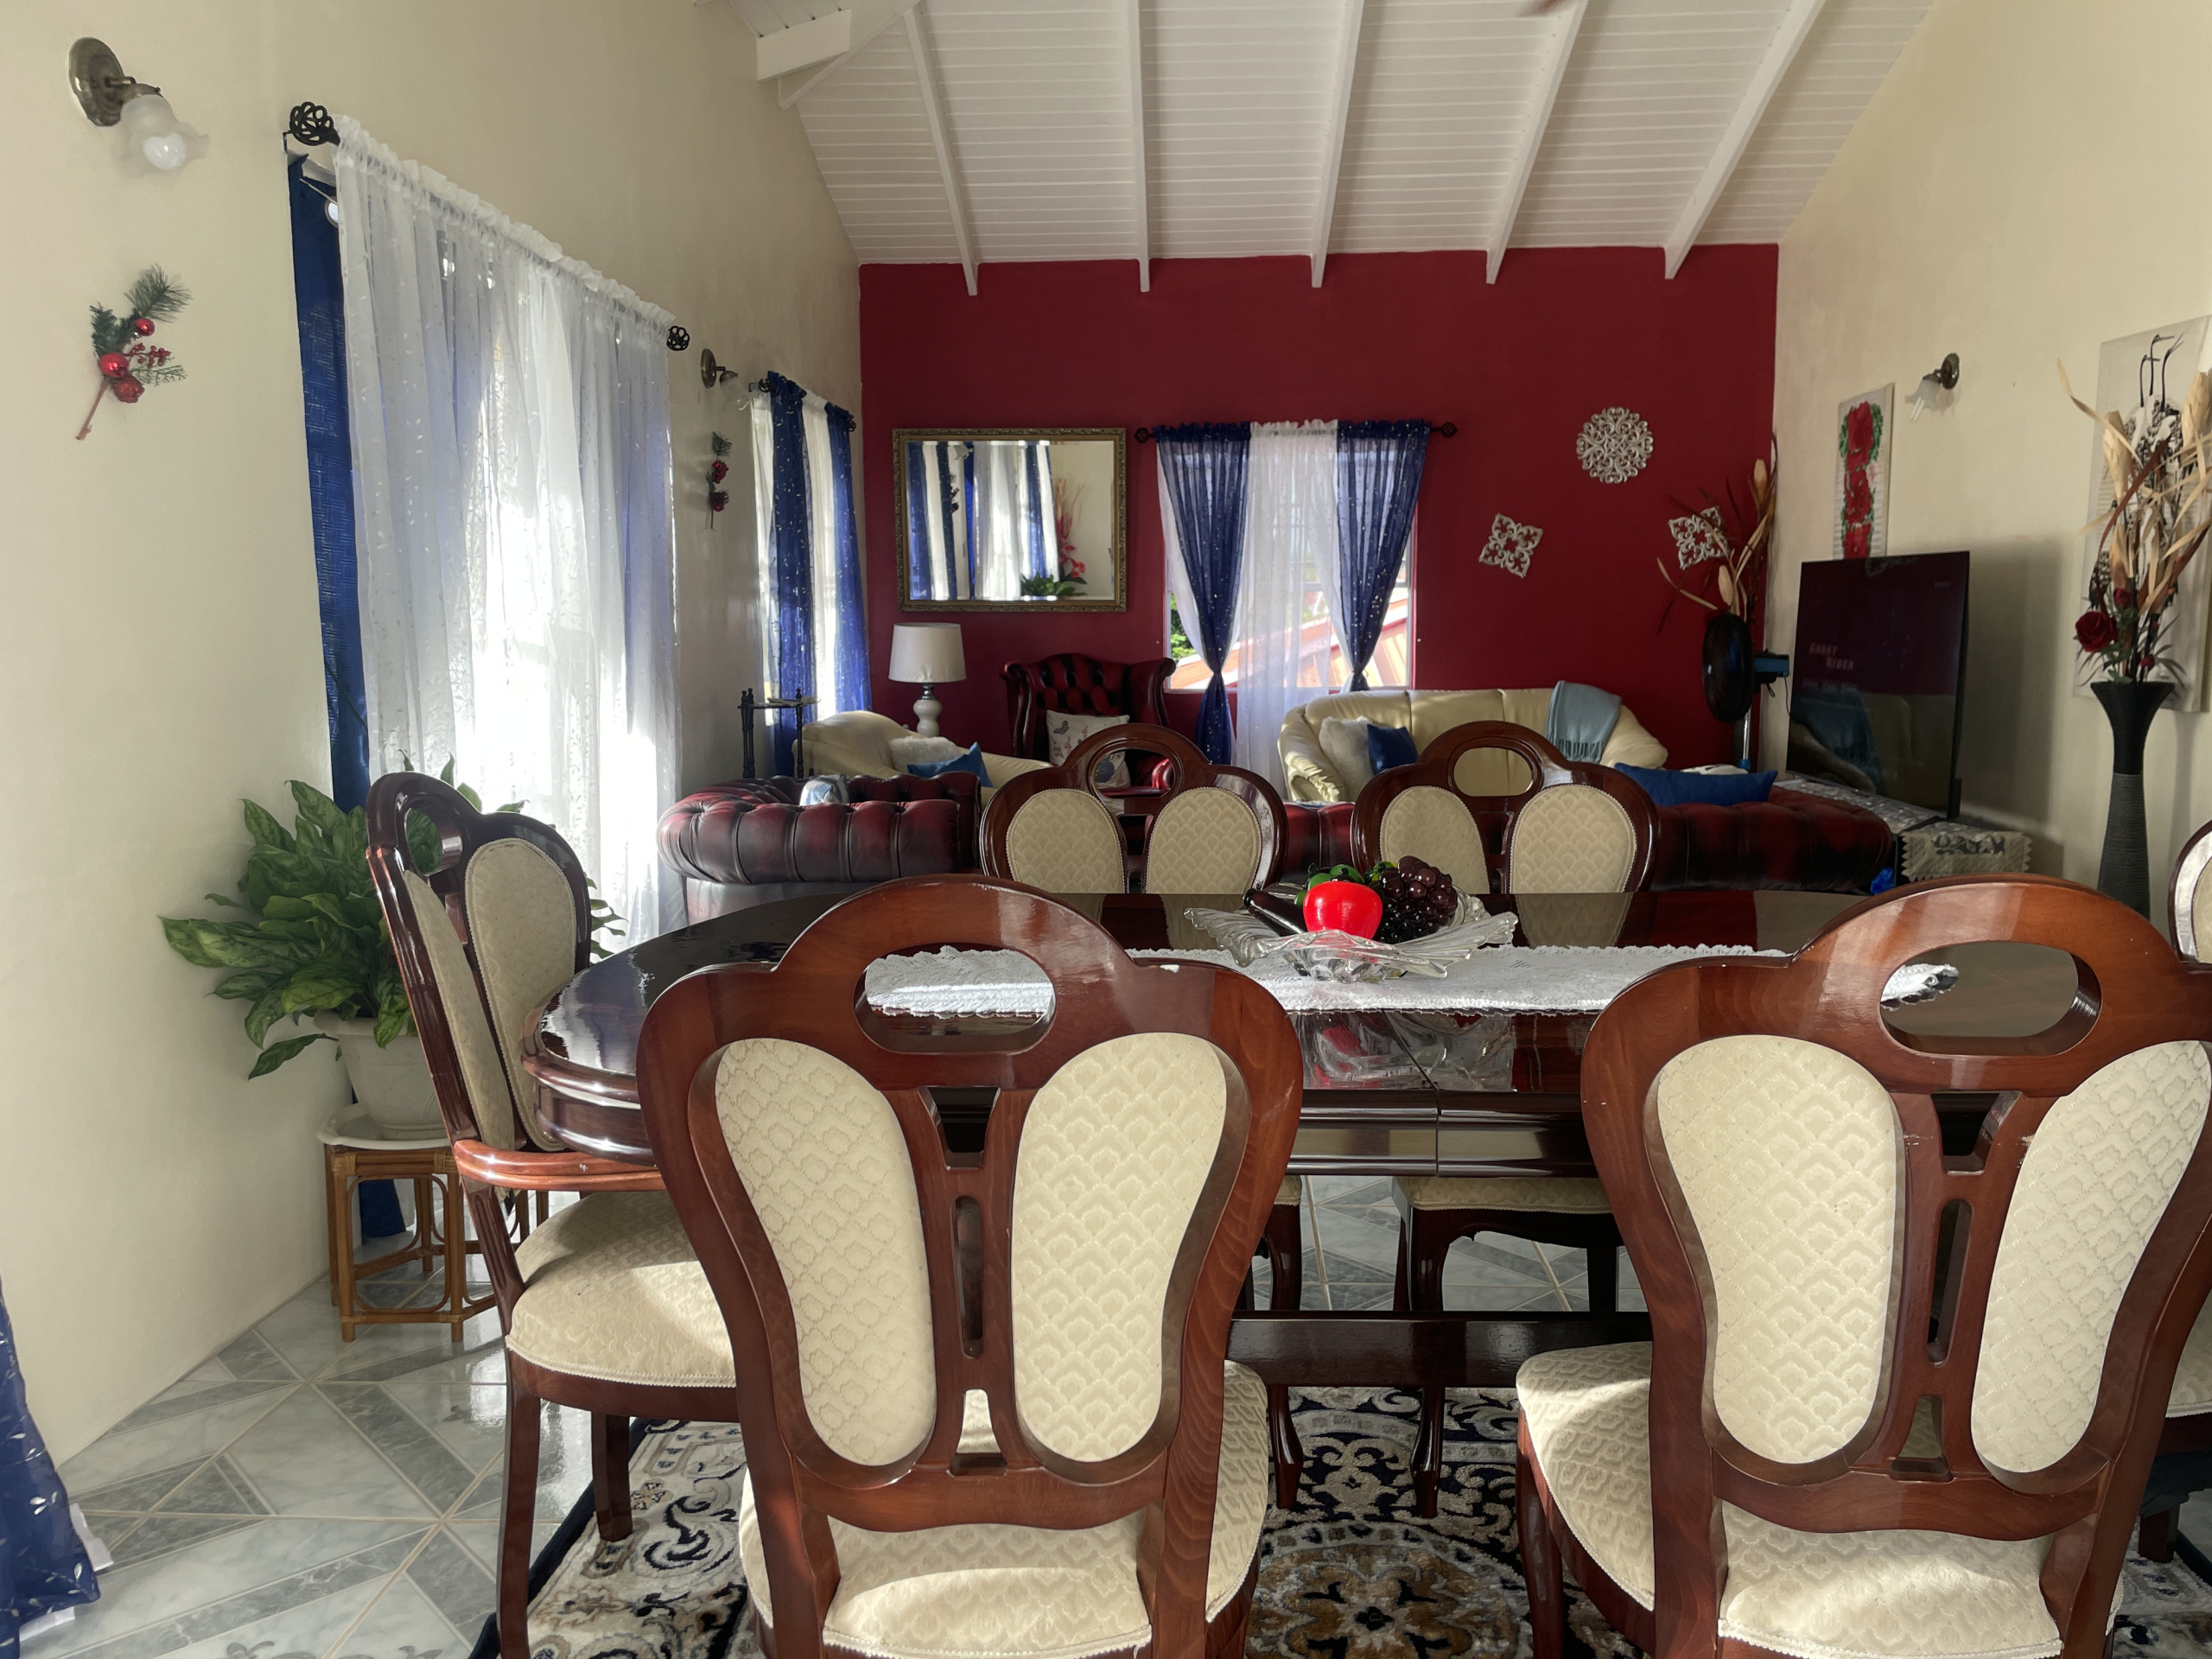 4-Bedroom House for Sale in St. Lucia, Blackbay vieux fort